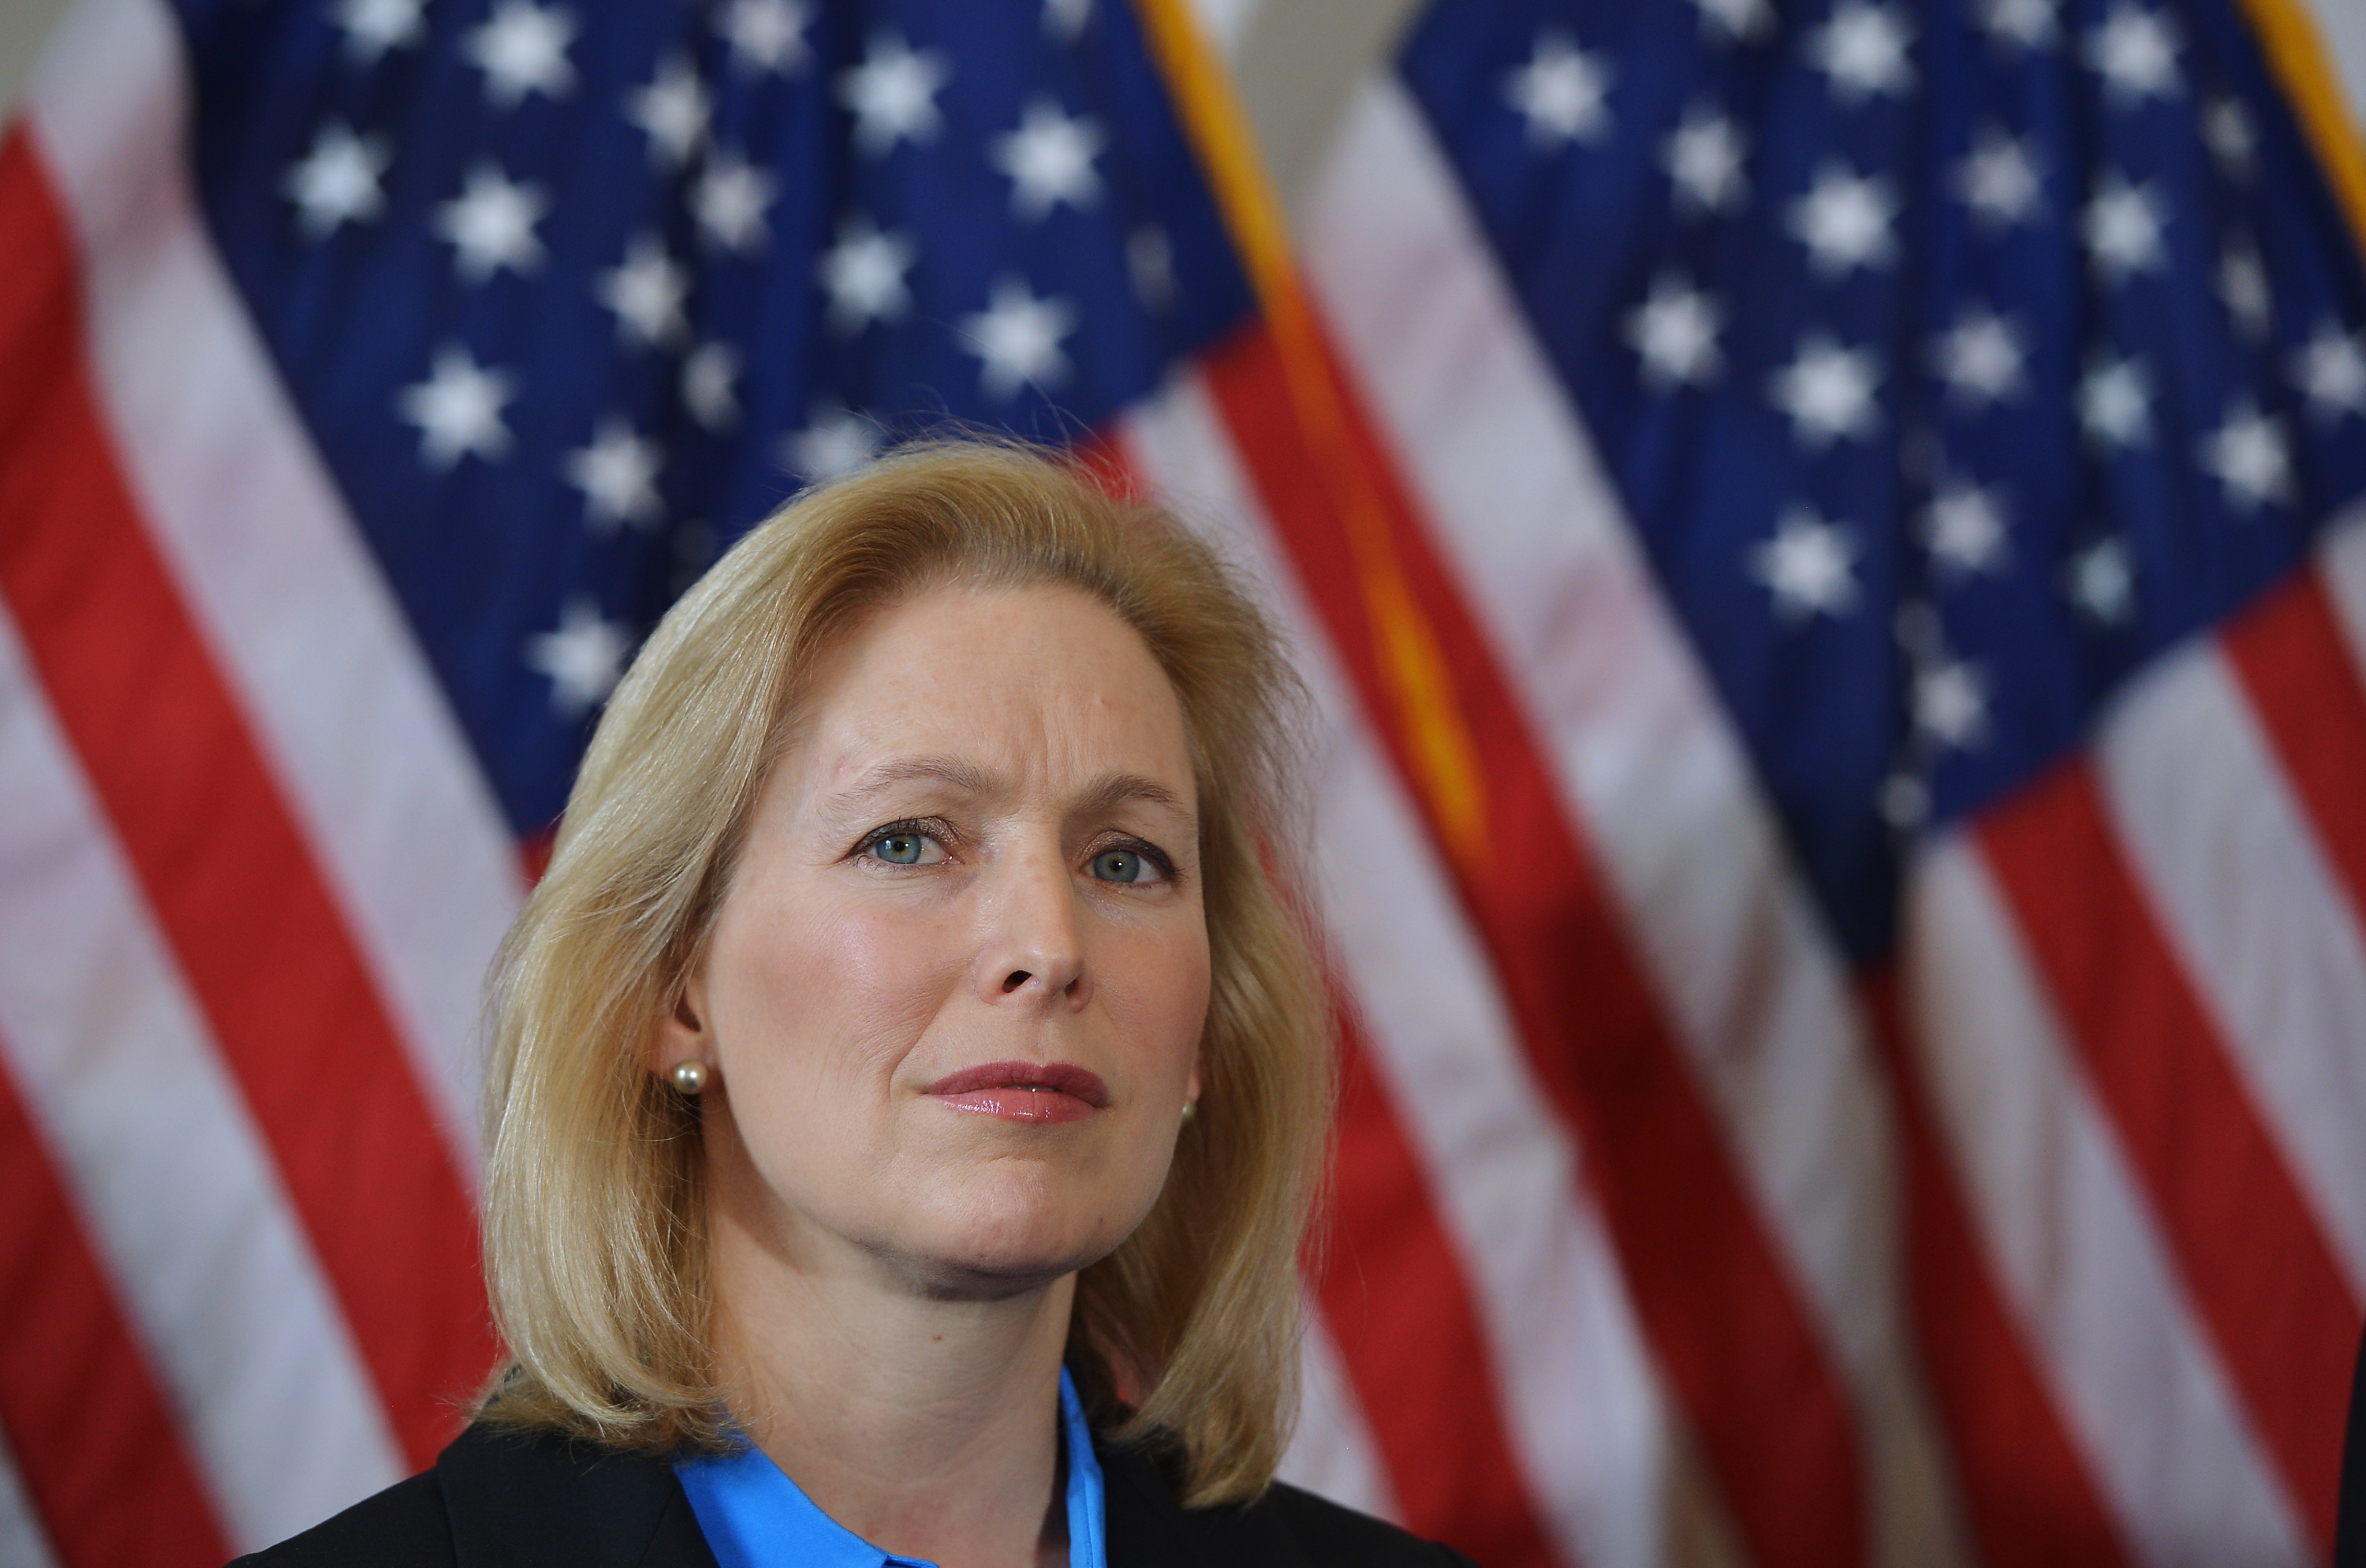 Senator Kirsten Gillibrand attends a press conference in the Russell Senate Office Building on Capitol Hill in Washington, Feb. 6, 2014. (Mandel Ngan—AFP/Getty Images)